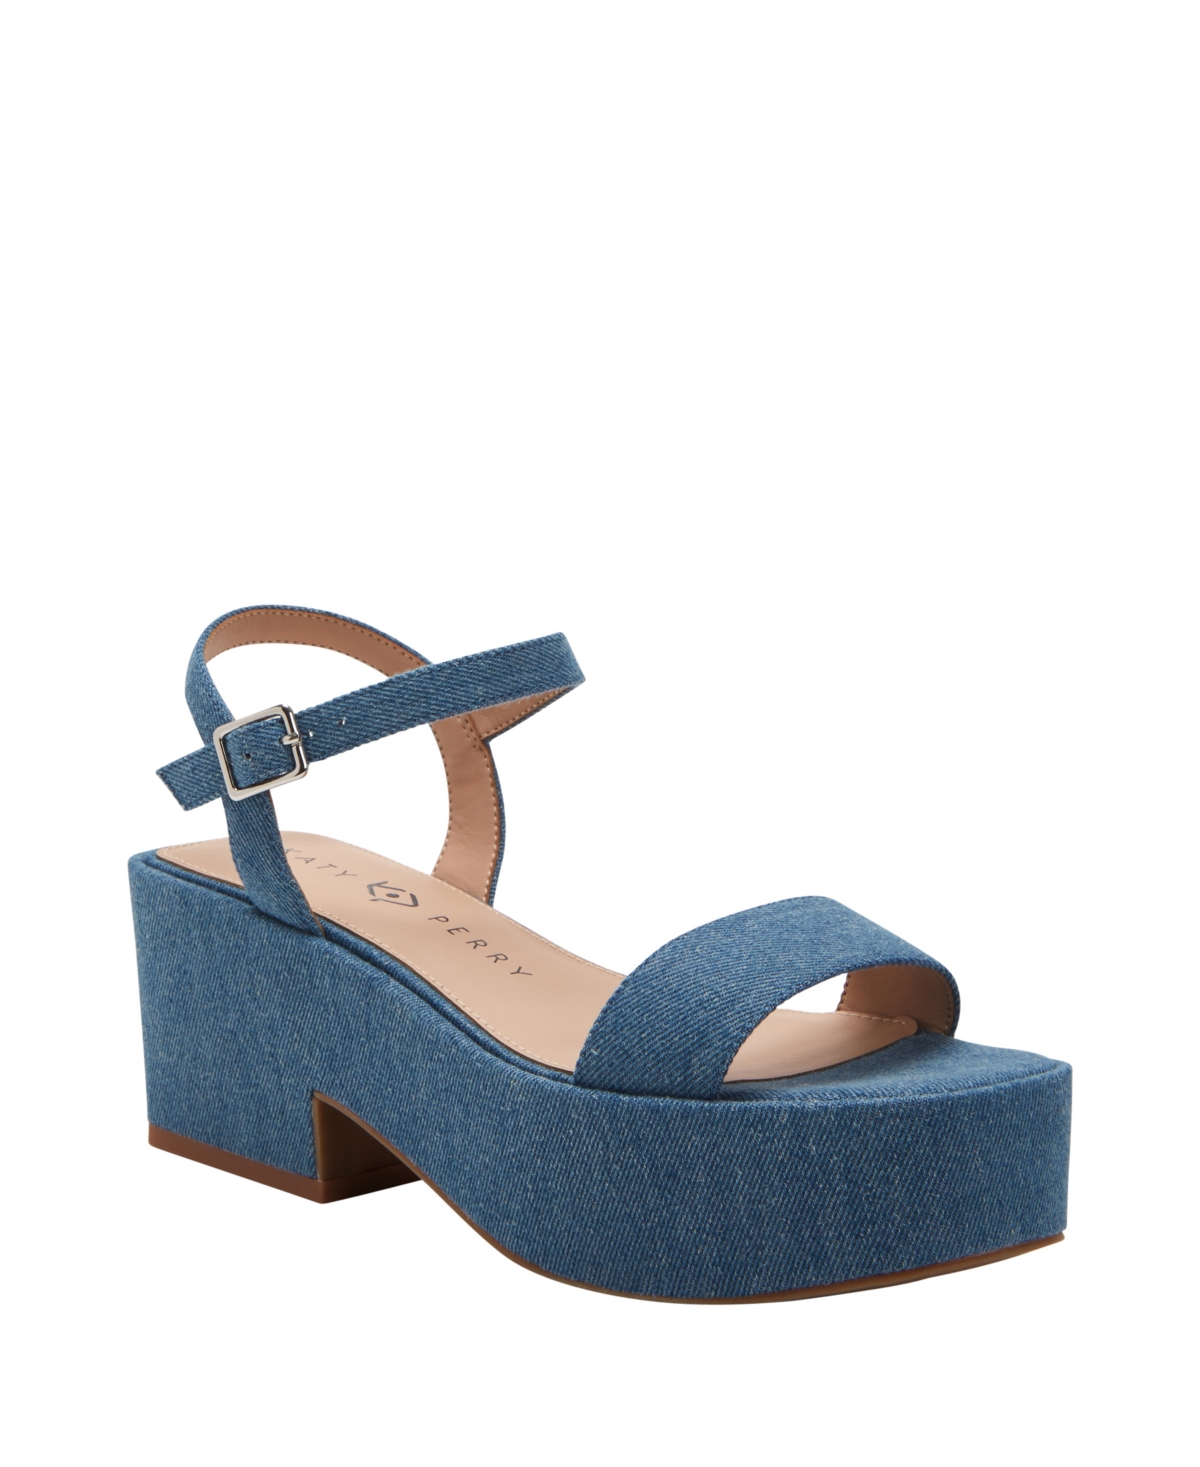 Katy Perry Women's Busy Bee Strappy Platform Sandals In Blue